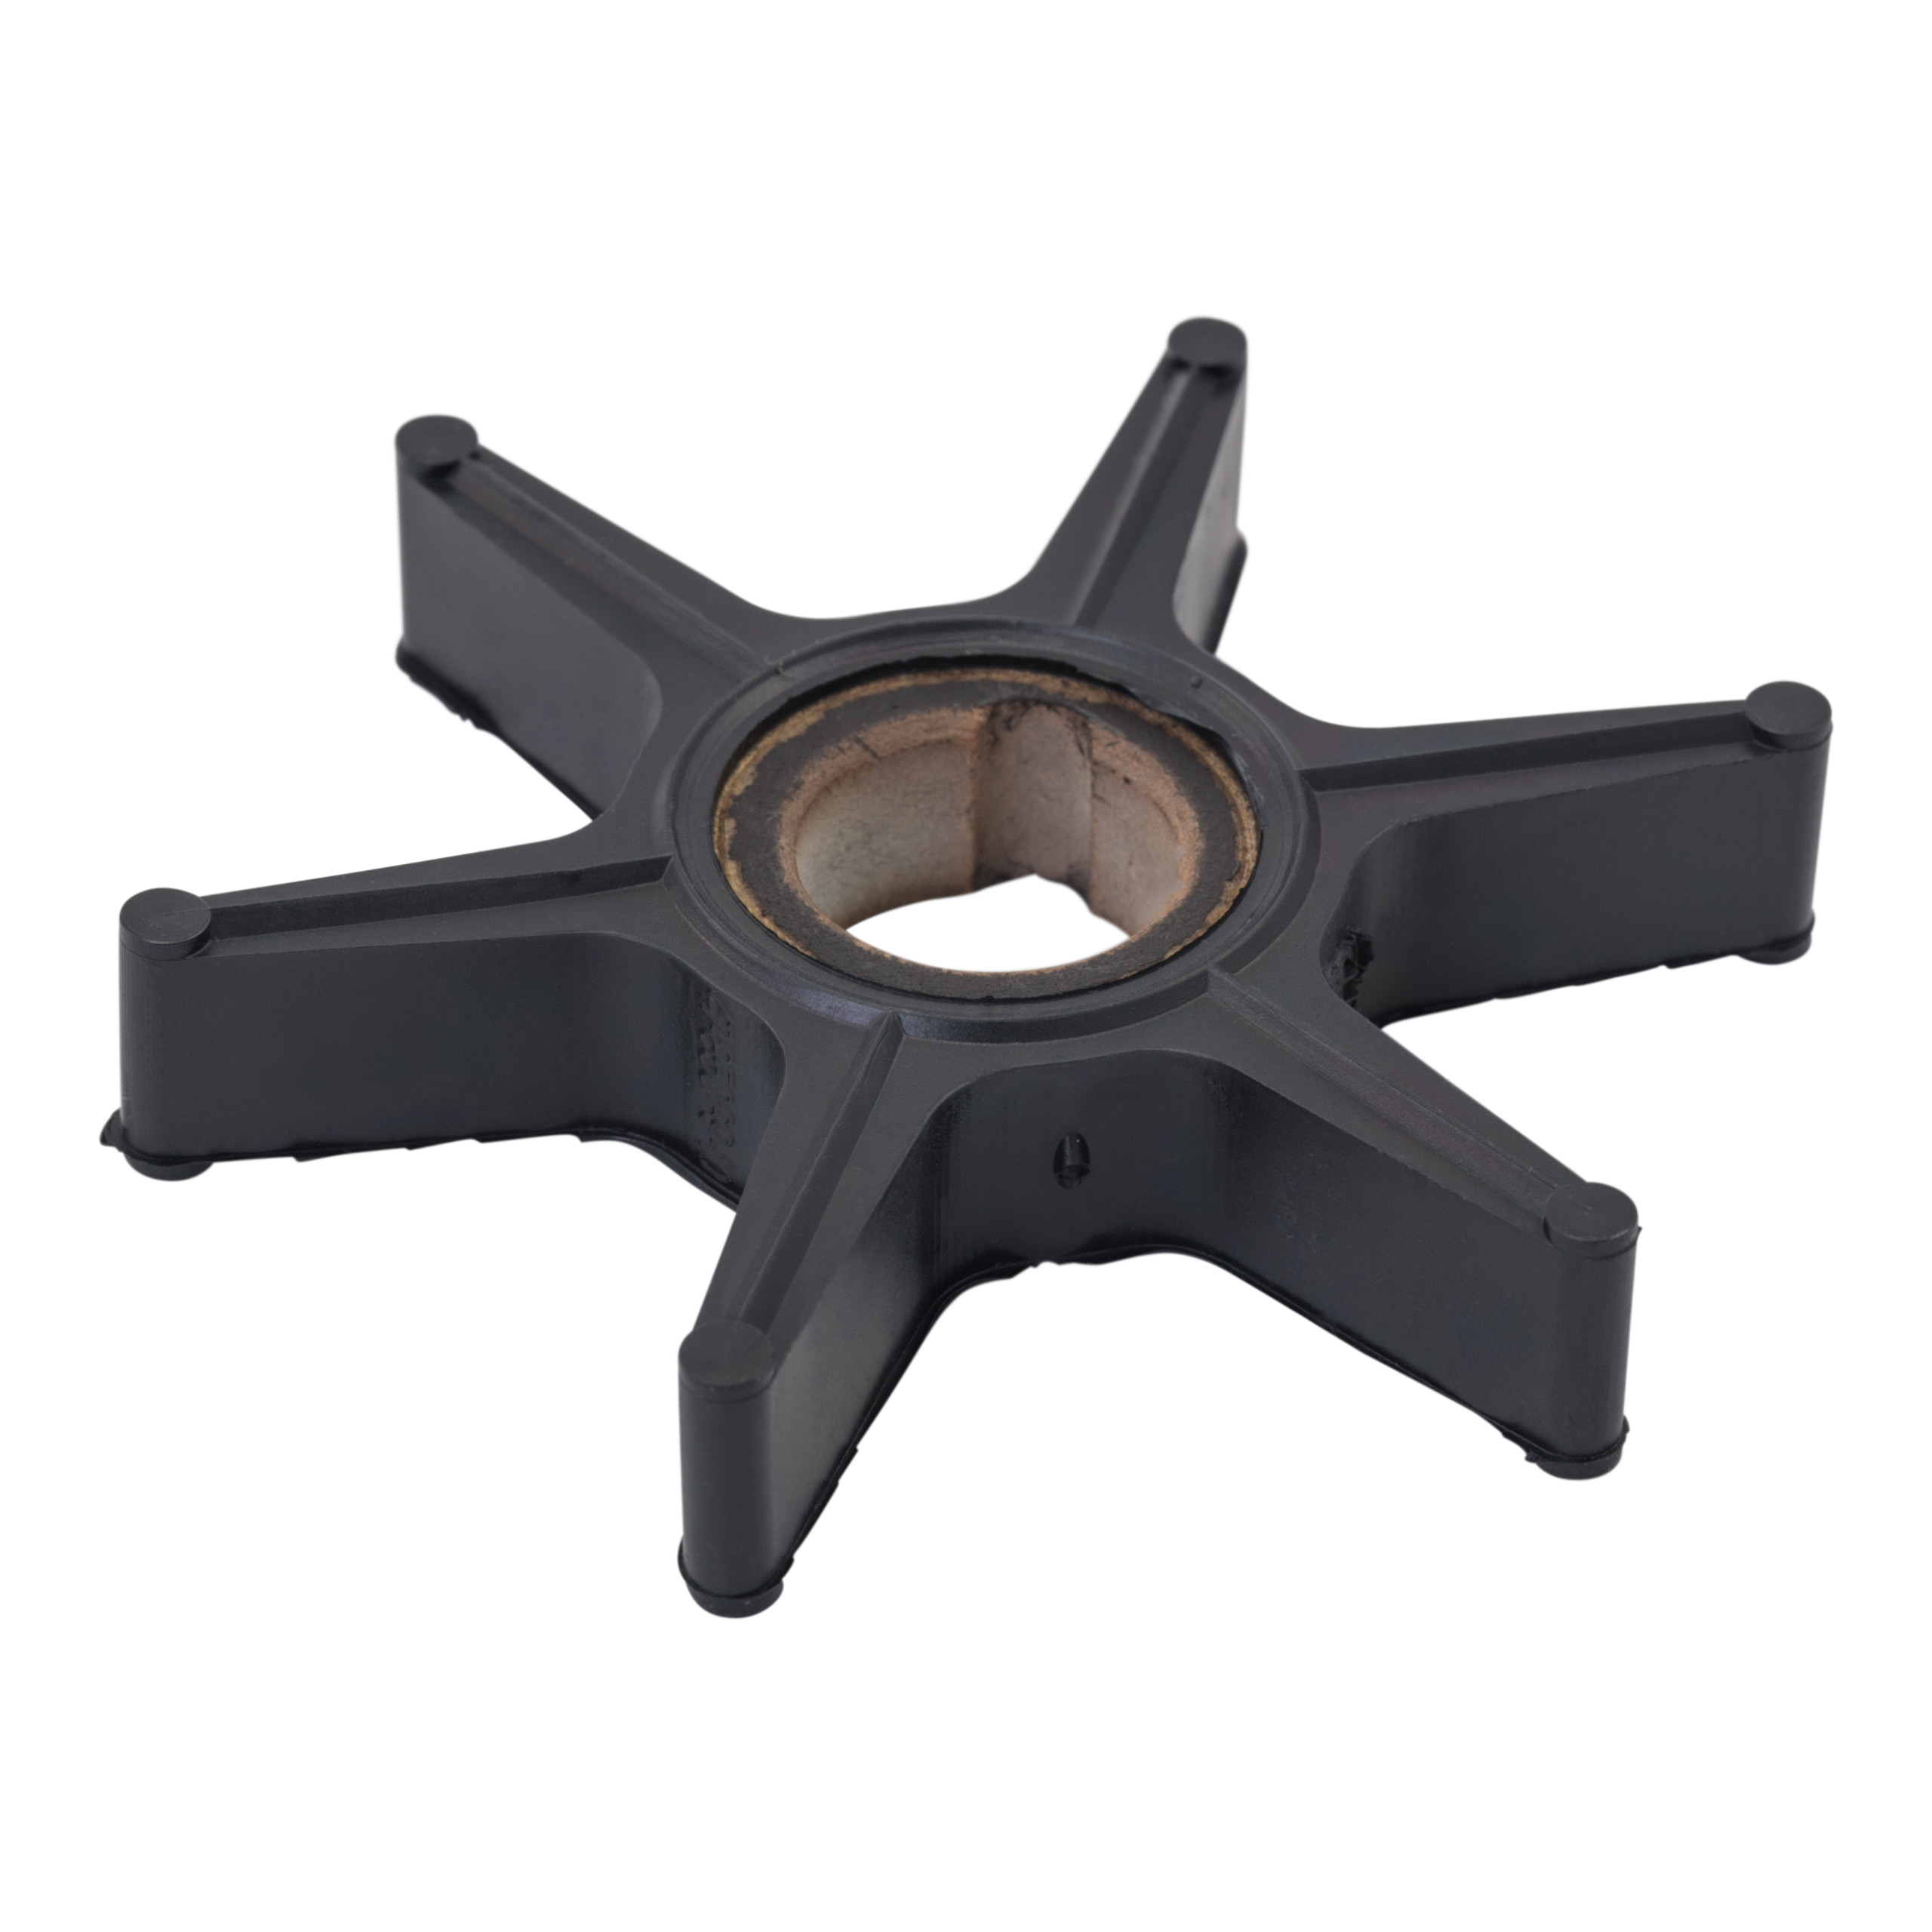 MARKGOO 47-85089-10 Water Pump Impeller for Mercury Mariner Chrysler Force Outboard 8 9.9 15 18 20 25 30 40 50 HP Boat Motor Engine Parts Replacement Sierra 18-3057 8508910 850893 850892 850891 